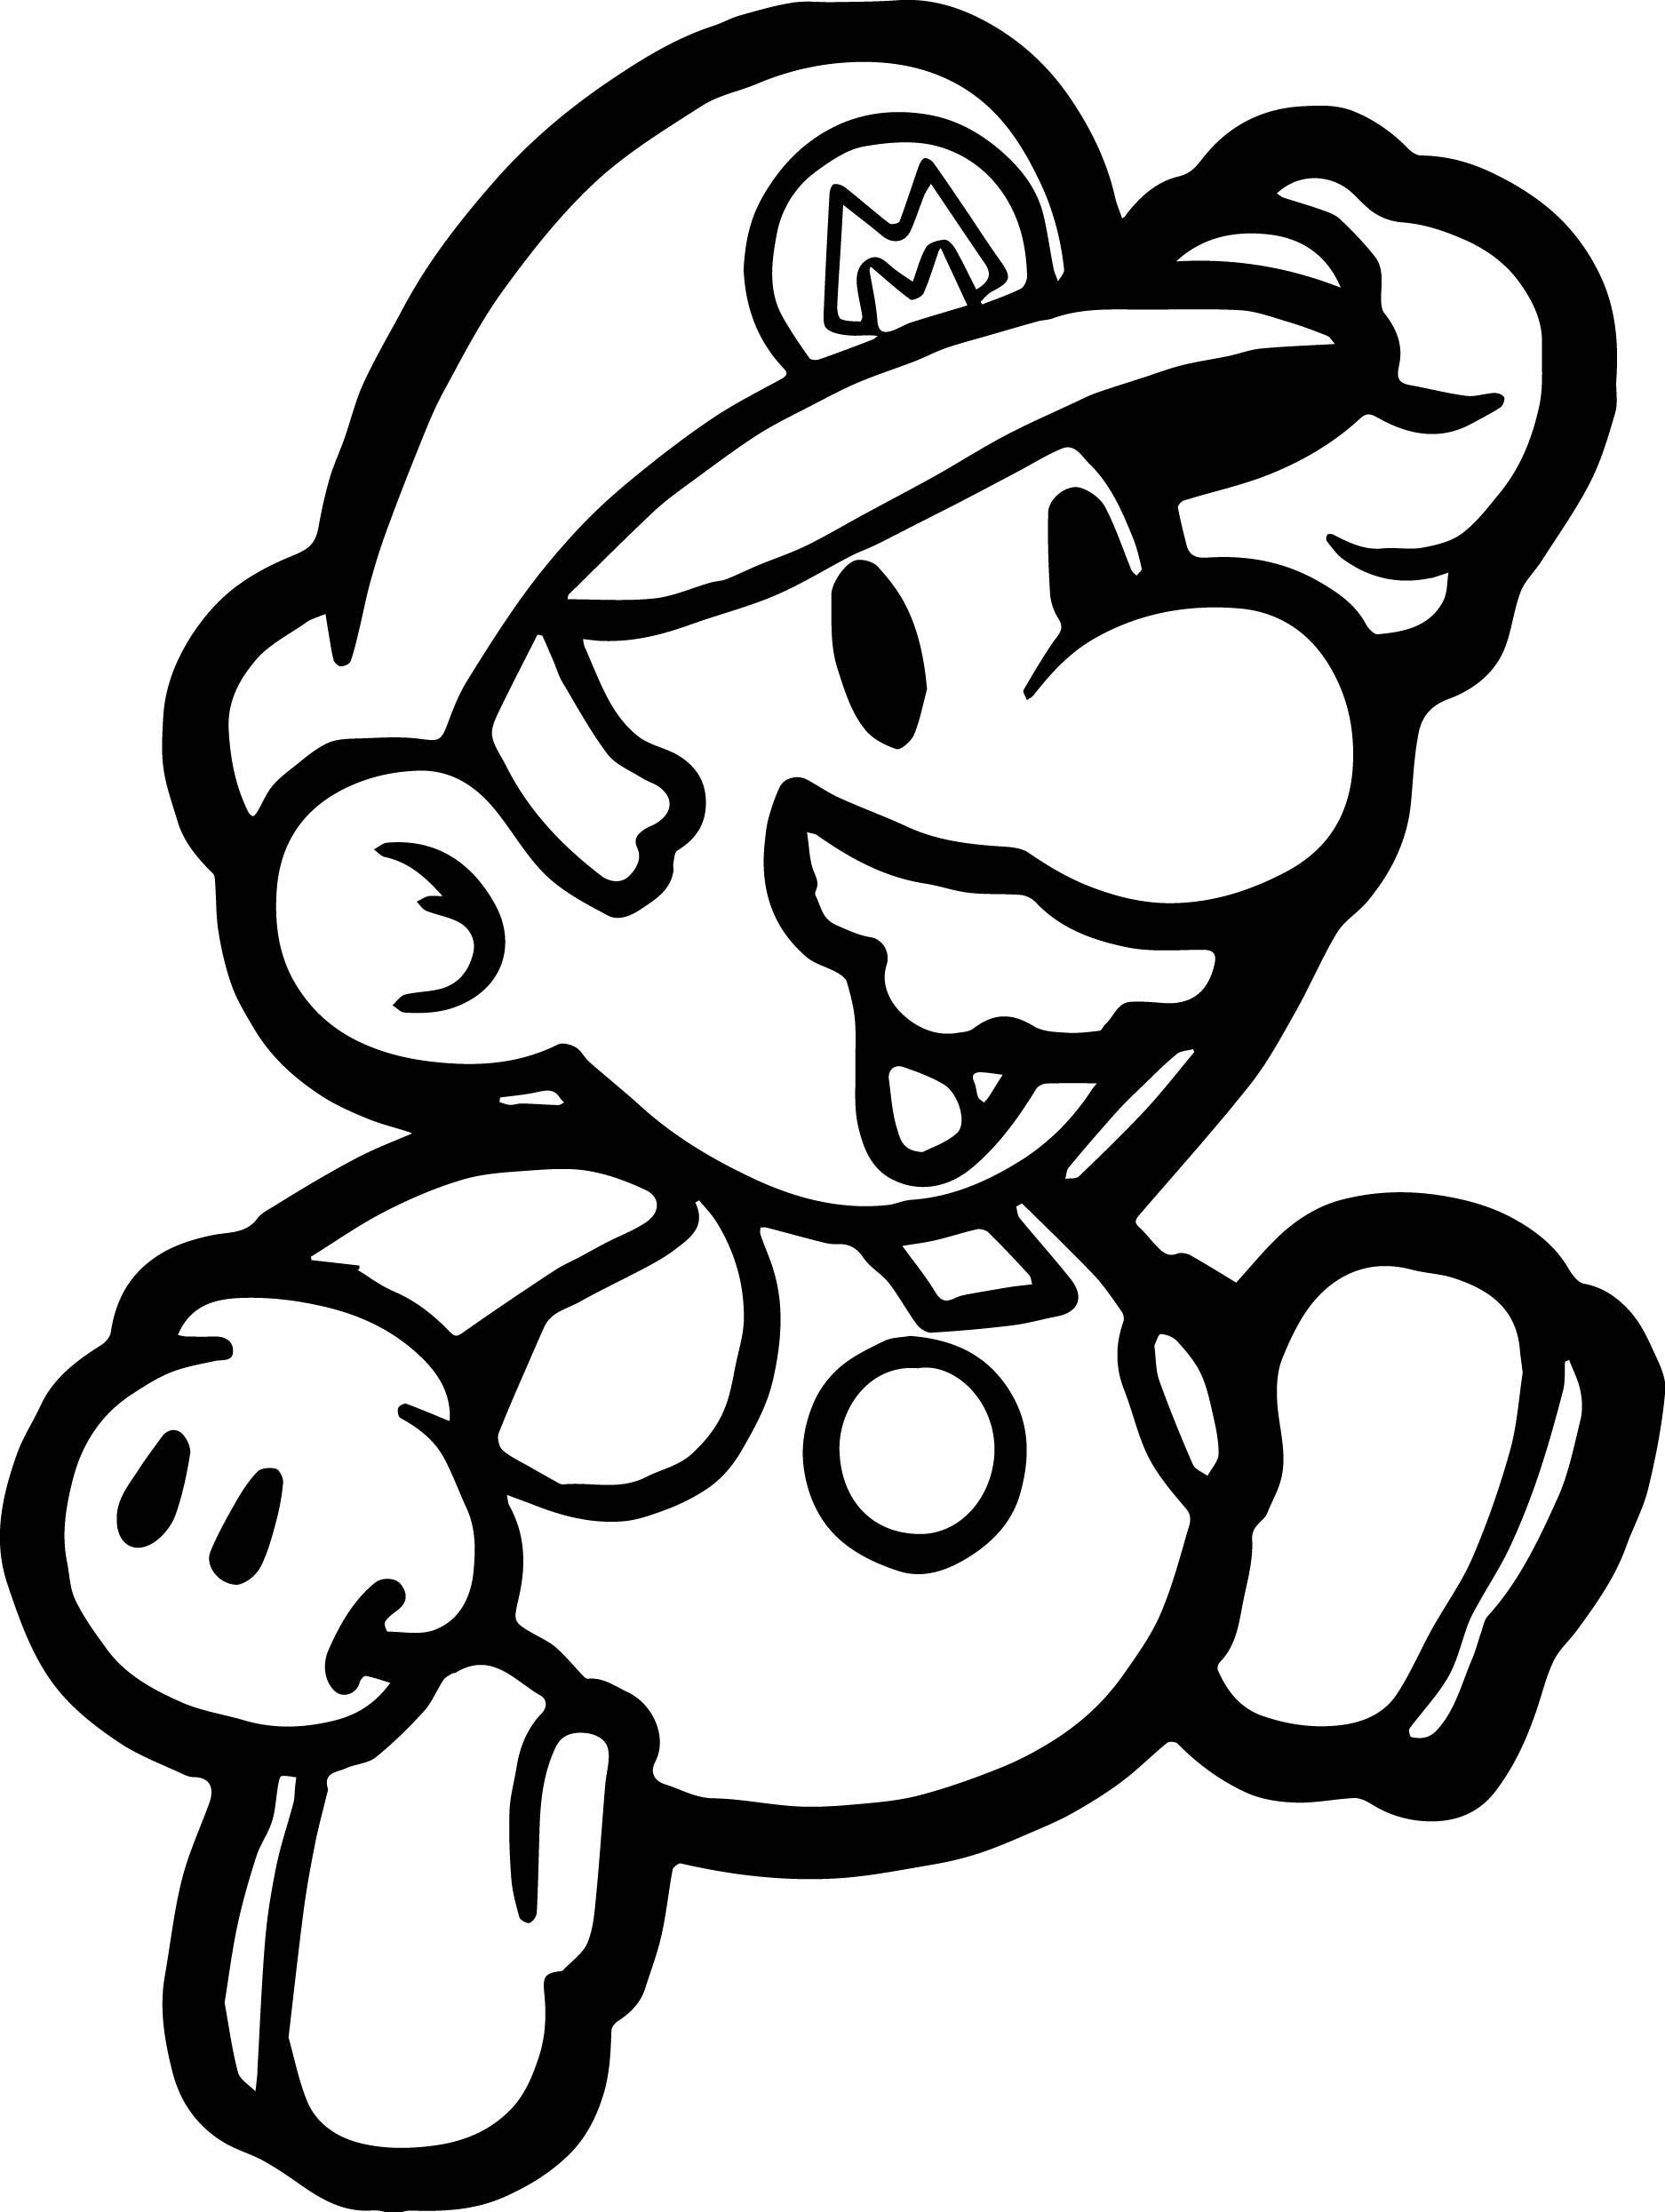 Super Mario Odyssey Coloring Pages - Coloring Home